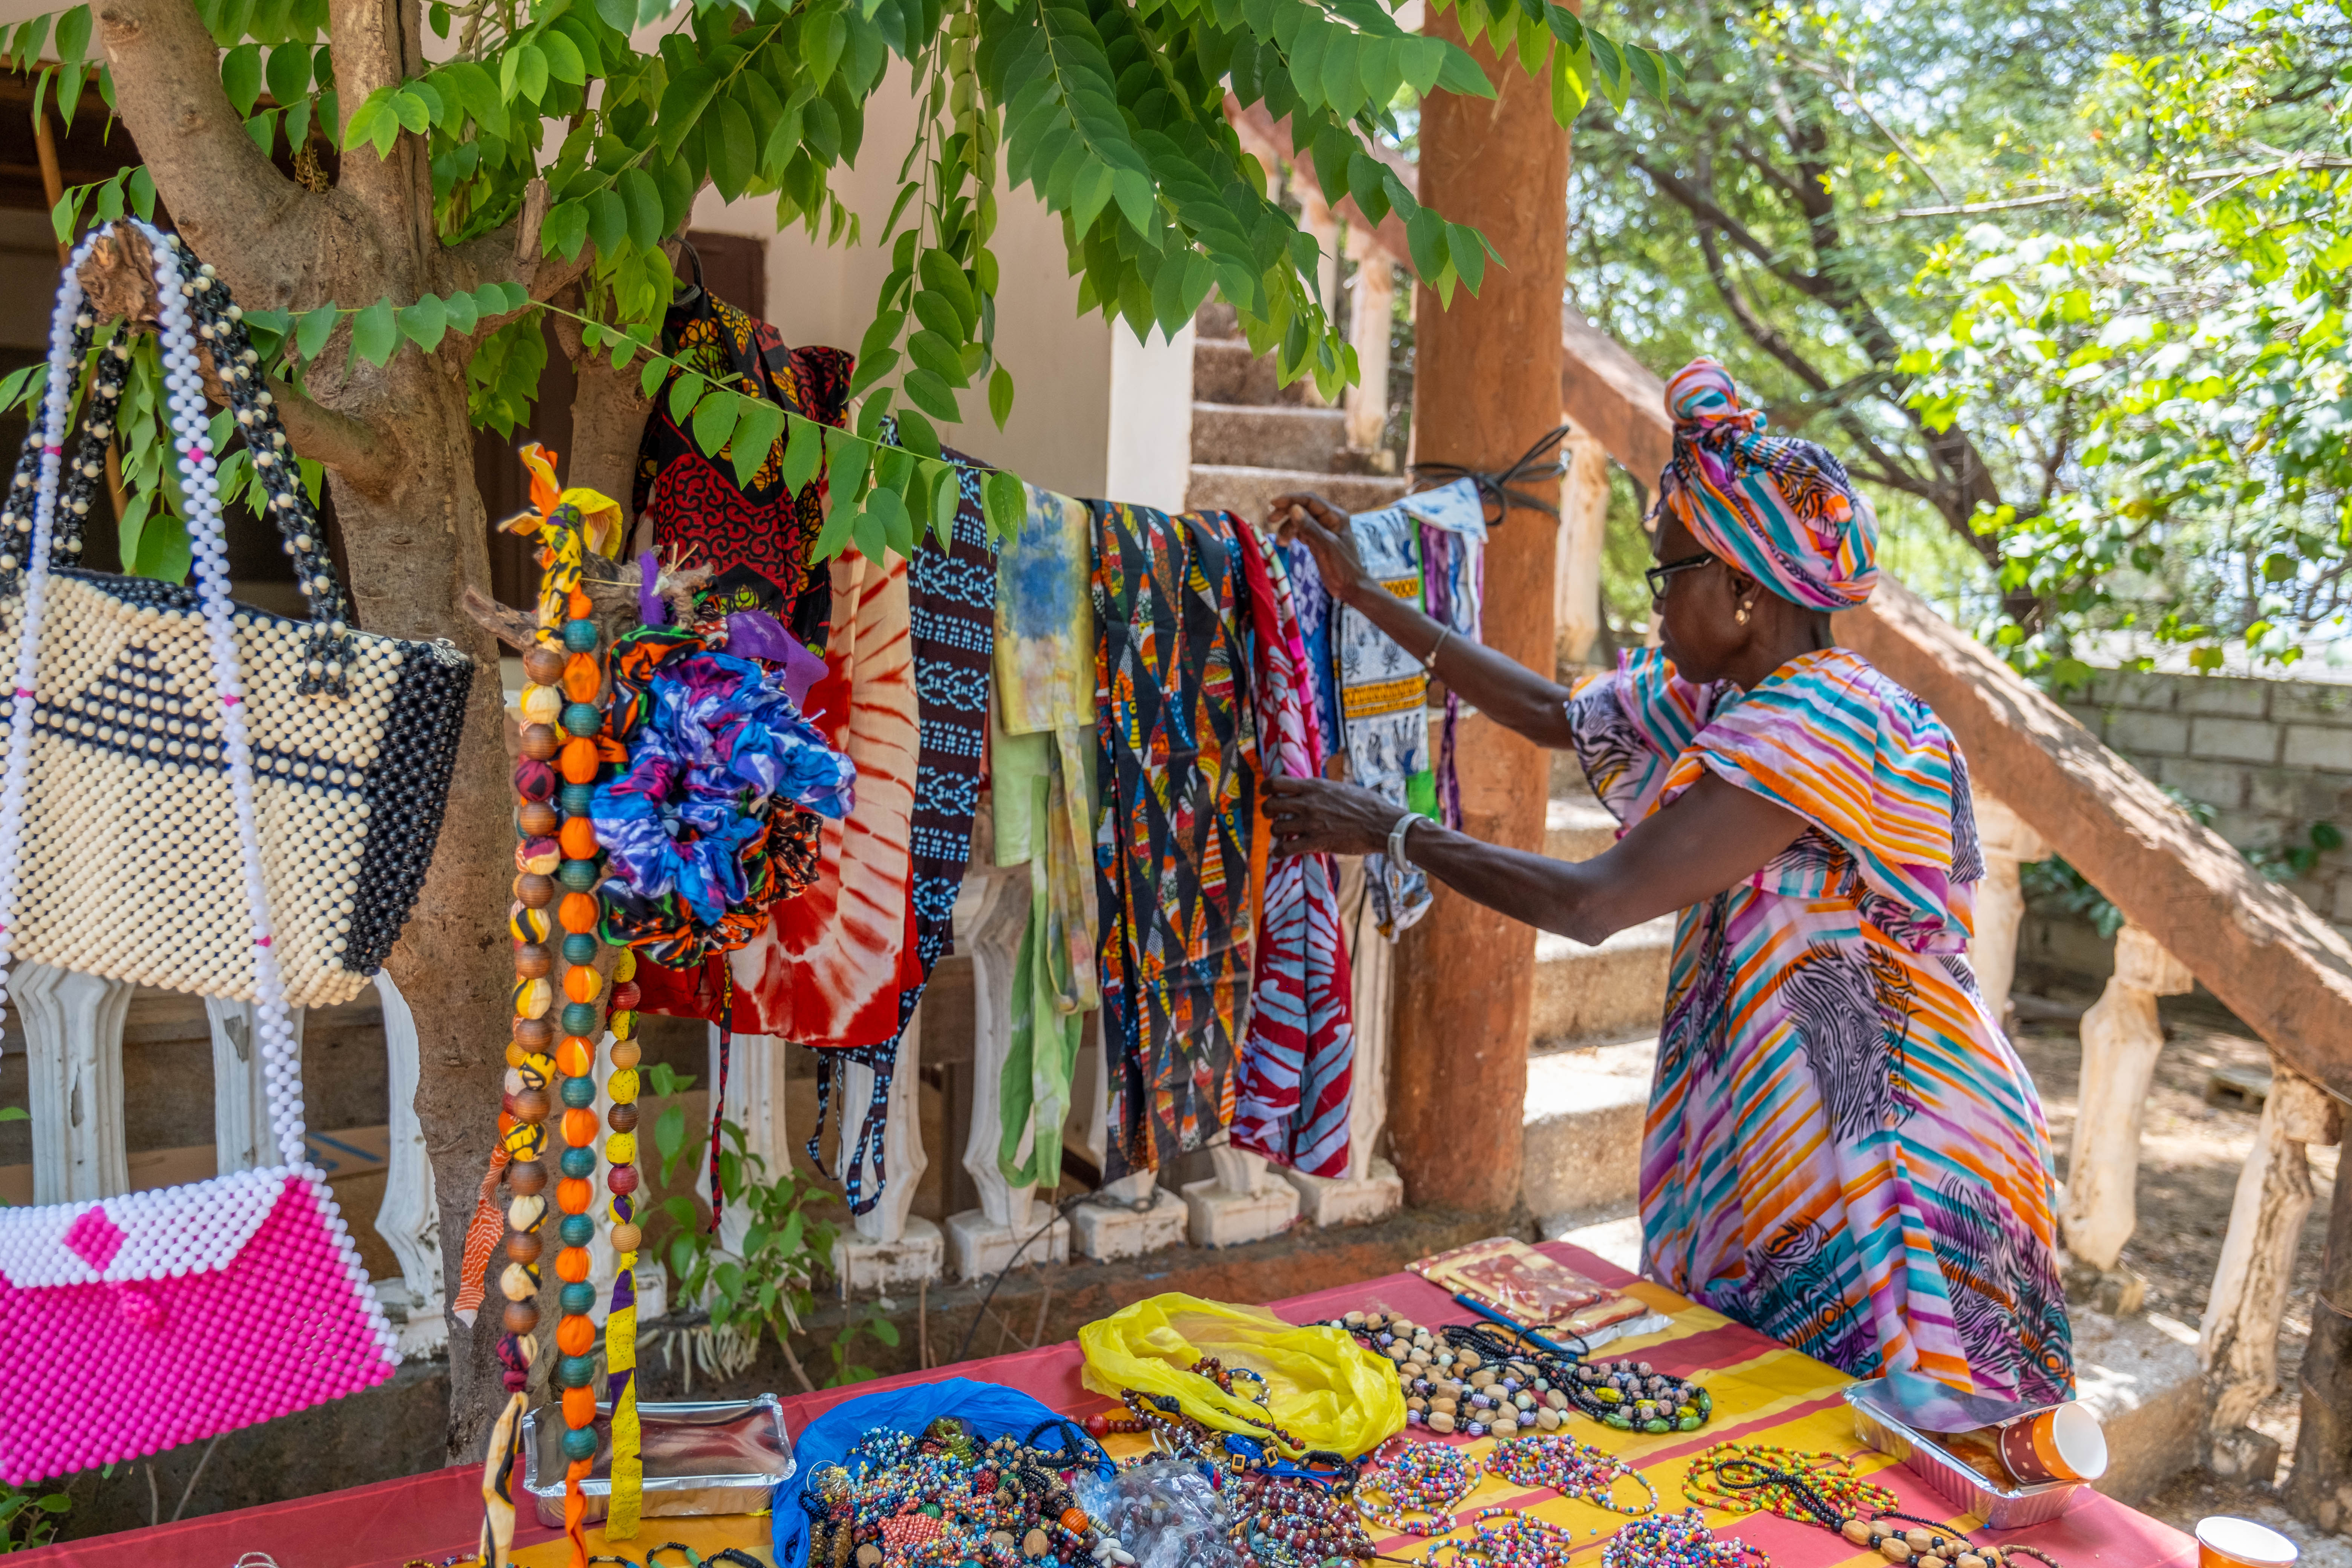 Woman selling hand-made products in Africa